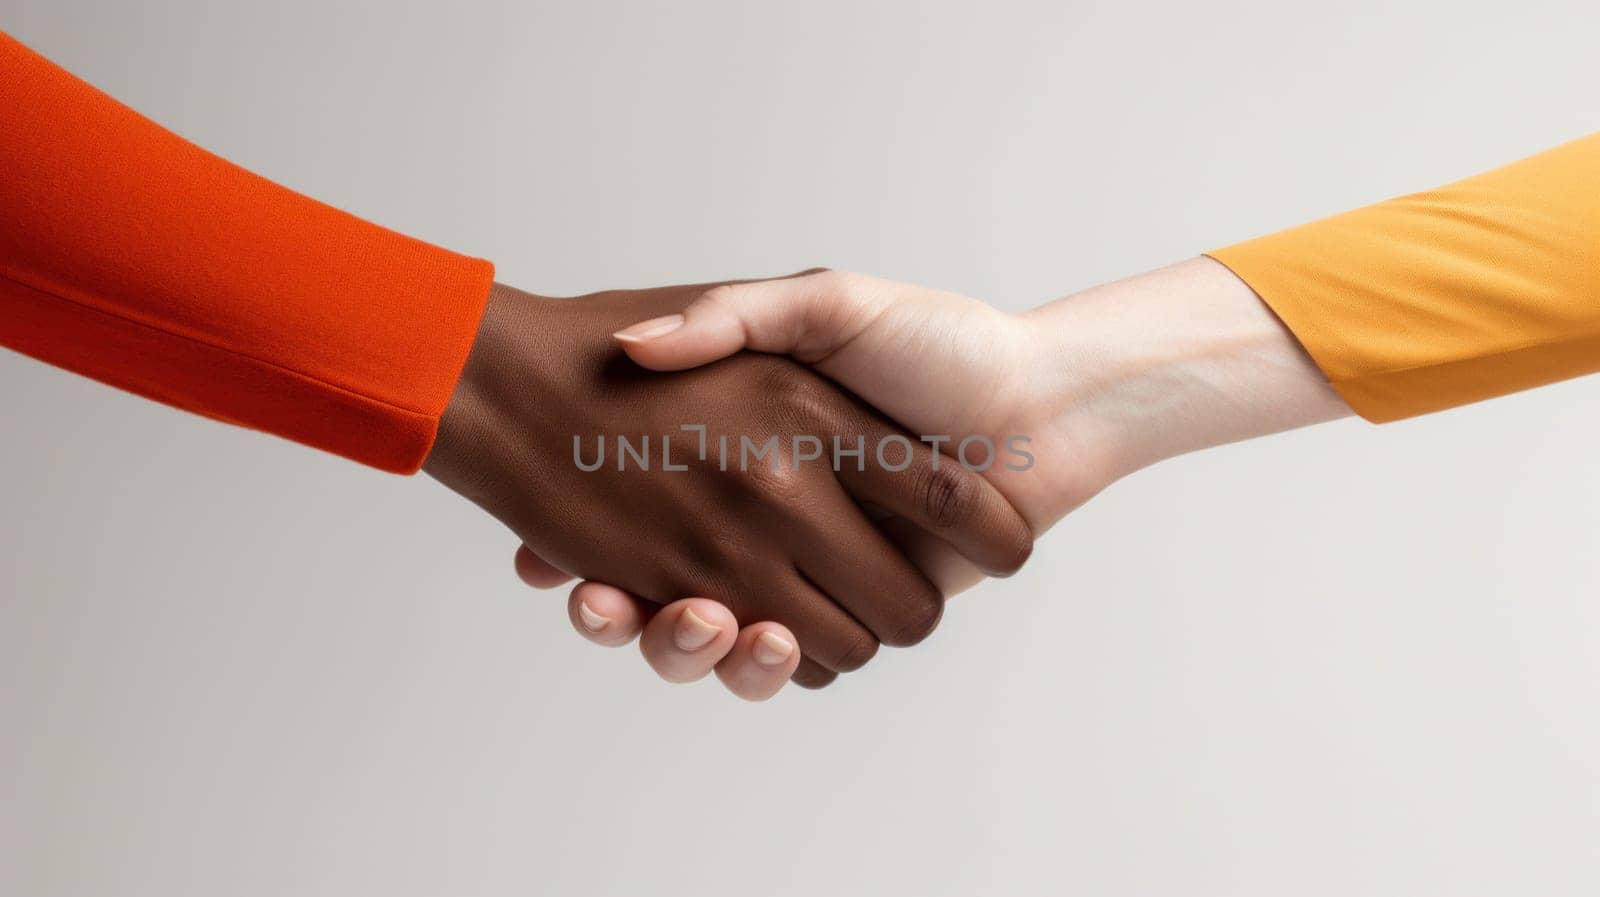 Two people of different races shaking hands with one hand in orange and the other in red, AI by starush